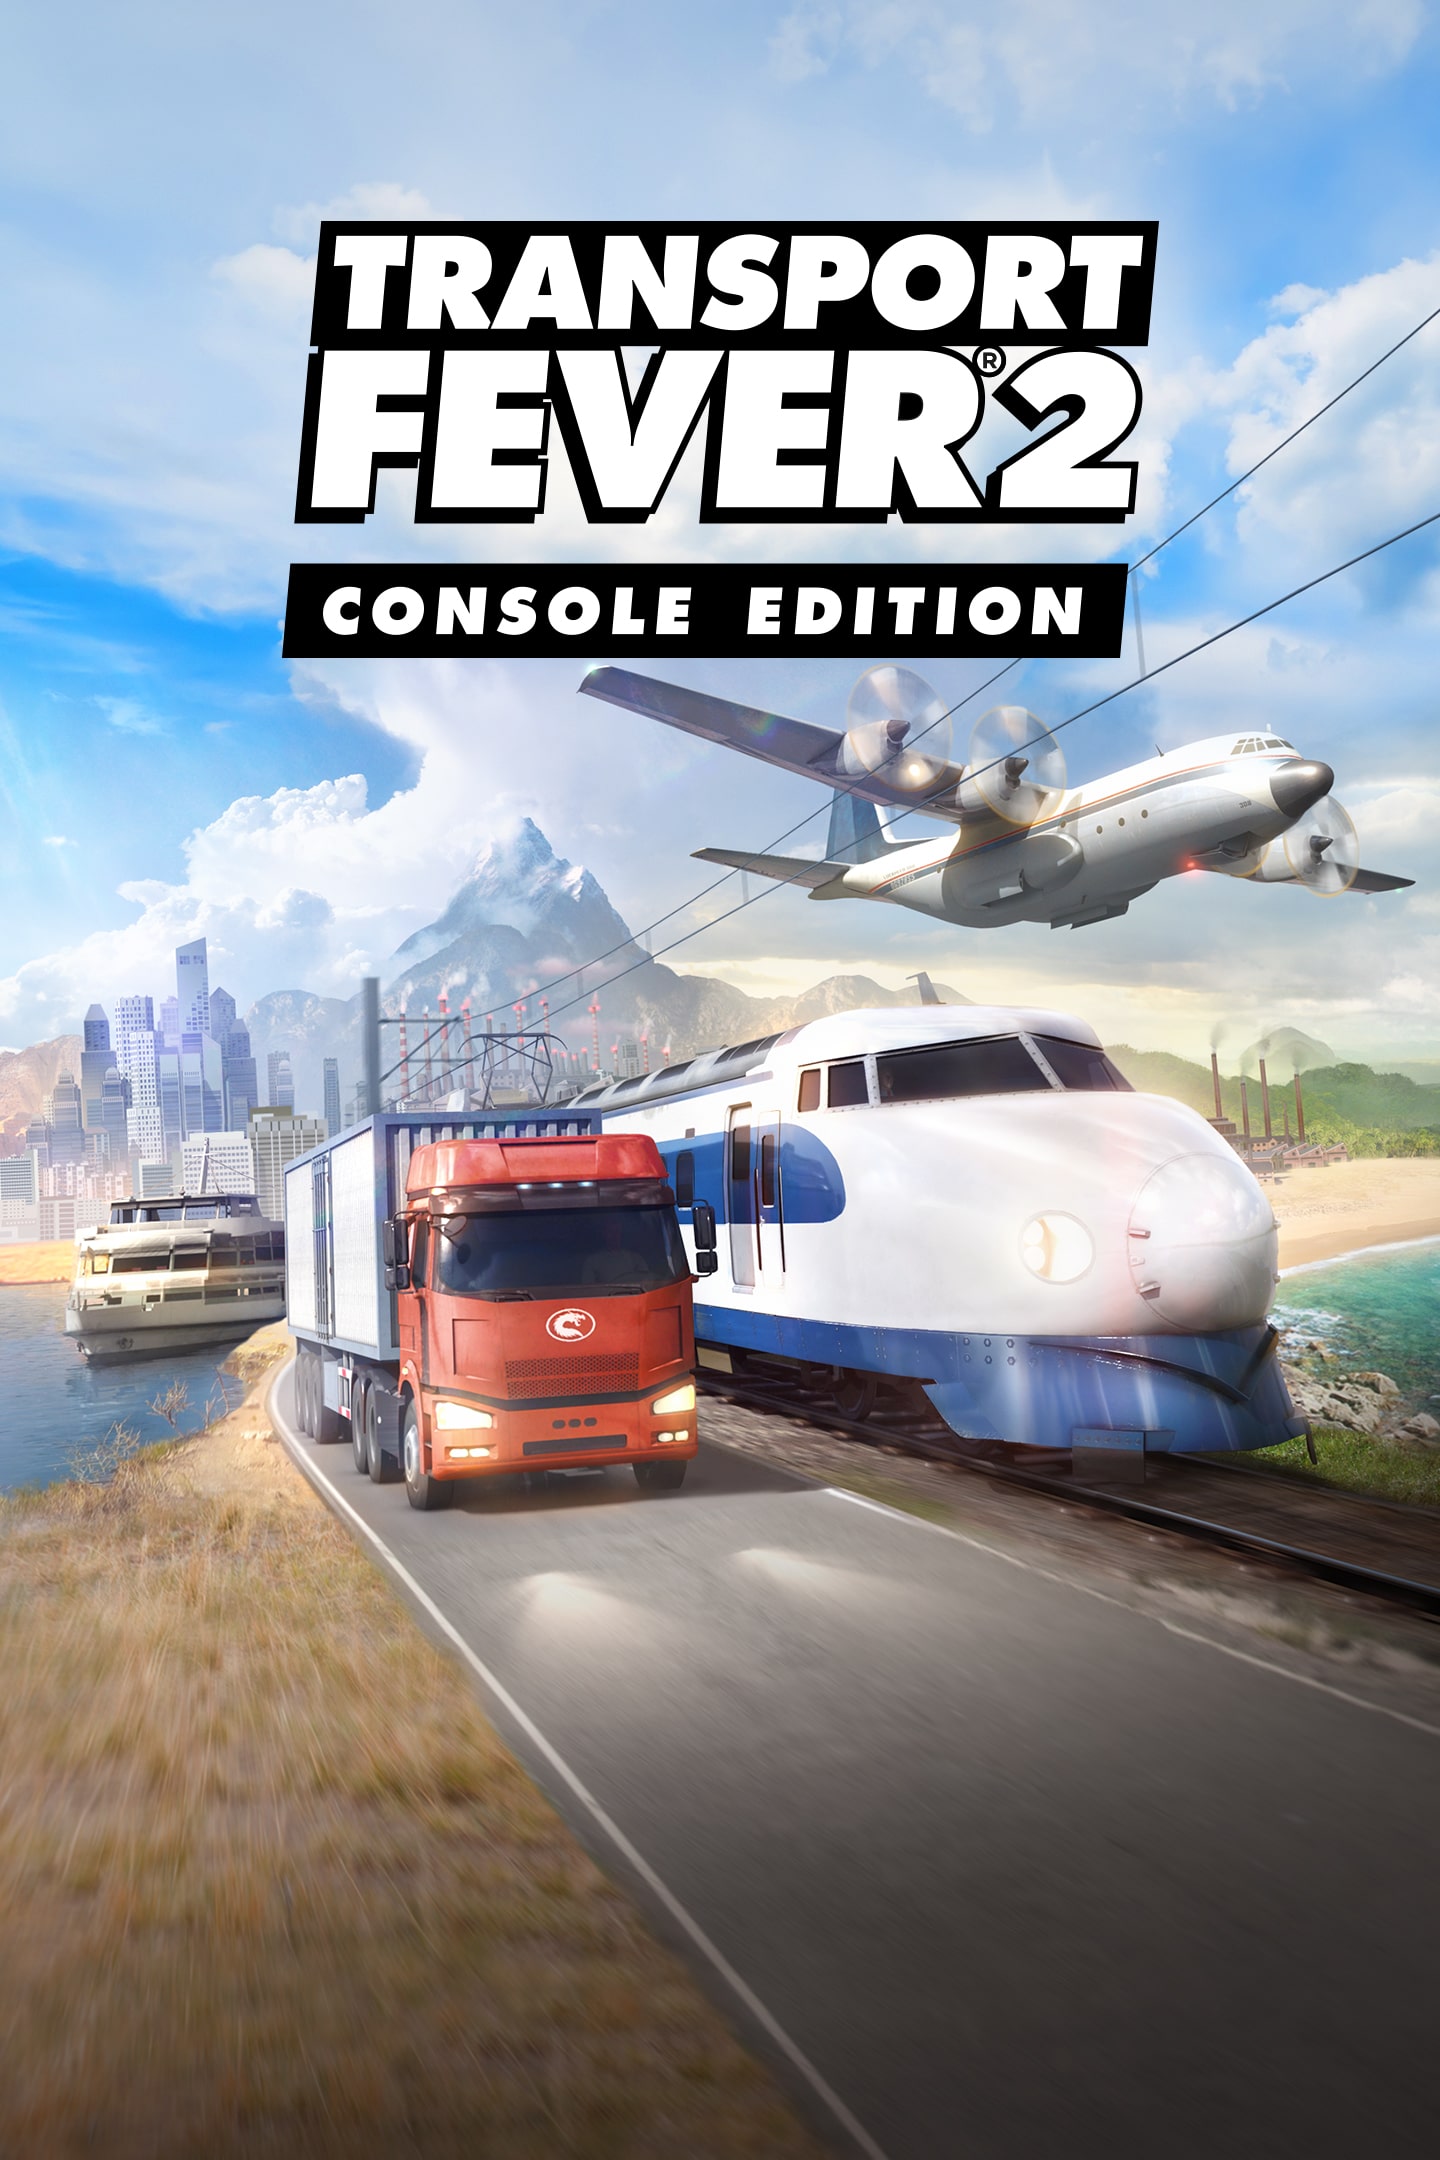 Transport Fever 2: Console Edition LOW COST